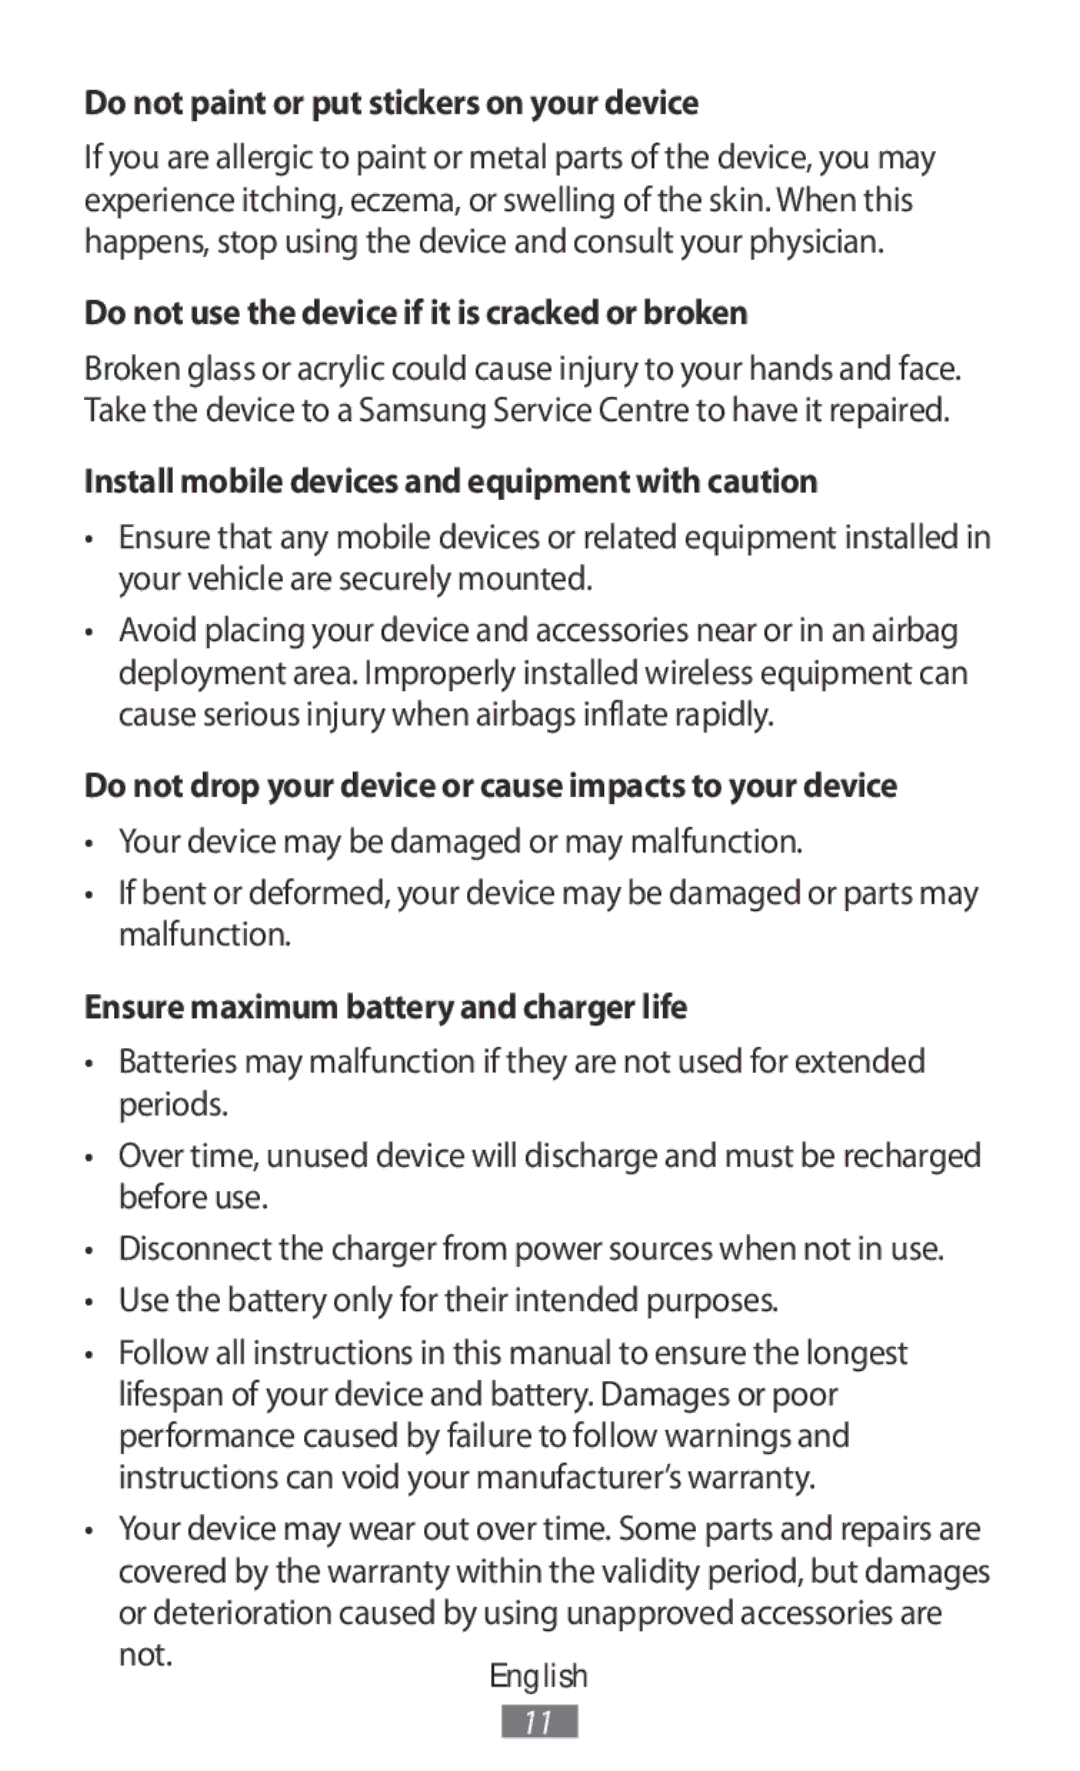 Samsung SM-R140NZAAXJP manual Do not paint or put stickers on your device, Do not use the device if it is cracked or broken 